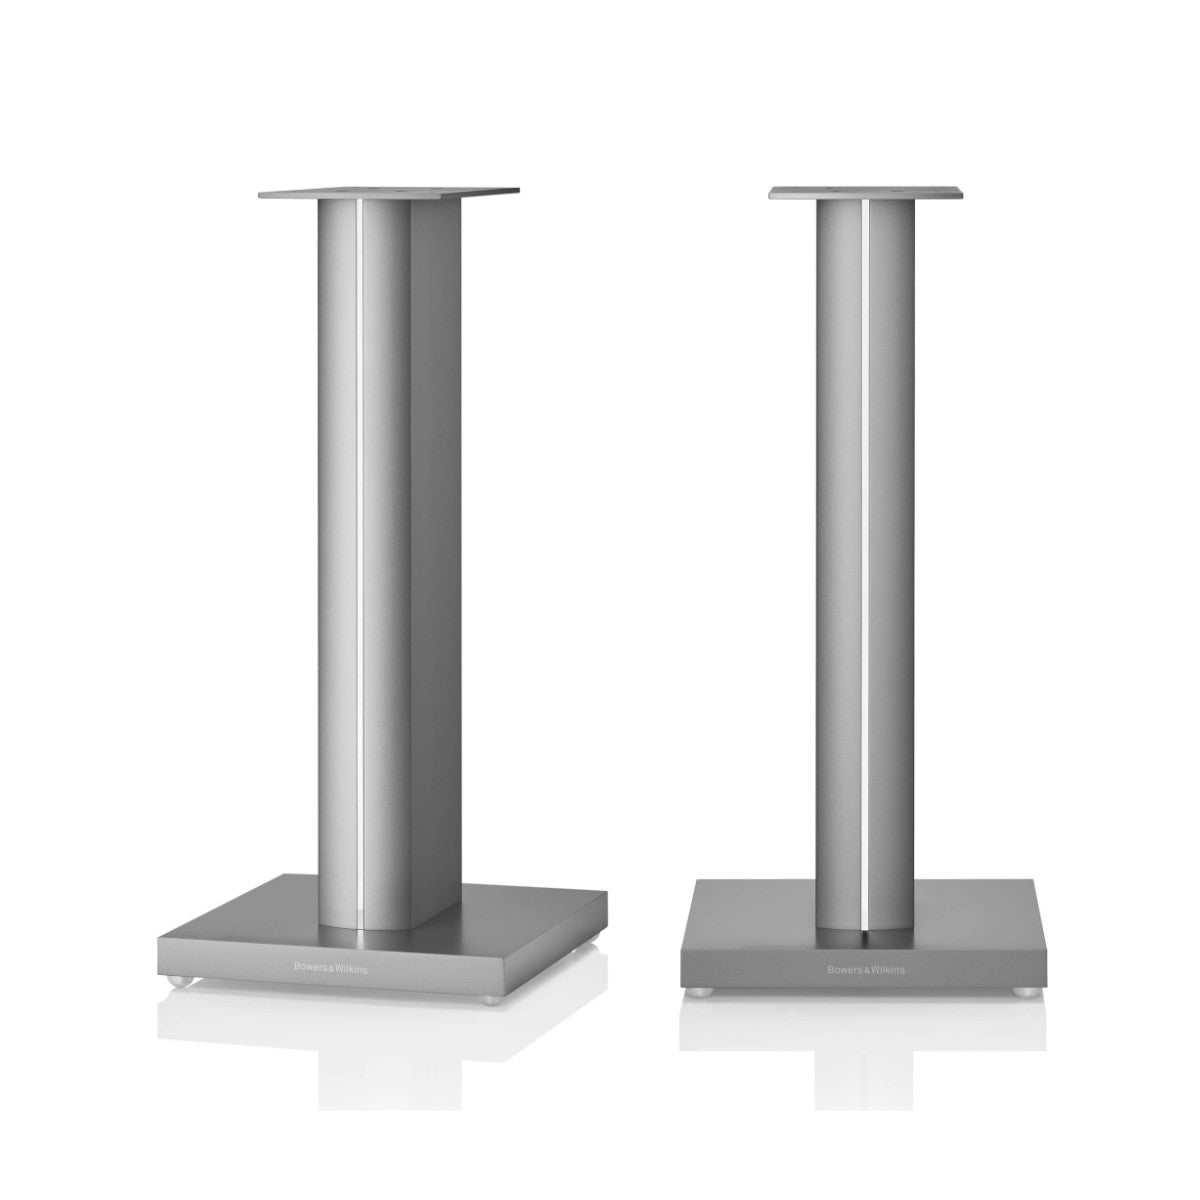 Bowers & Wilkins (B&W) FS-700 S3 Speaker Stand - Silver (Pair) - Ooberpad India